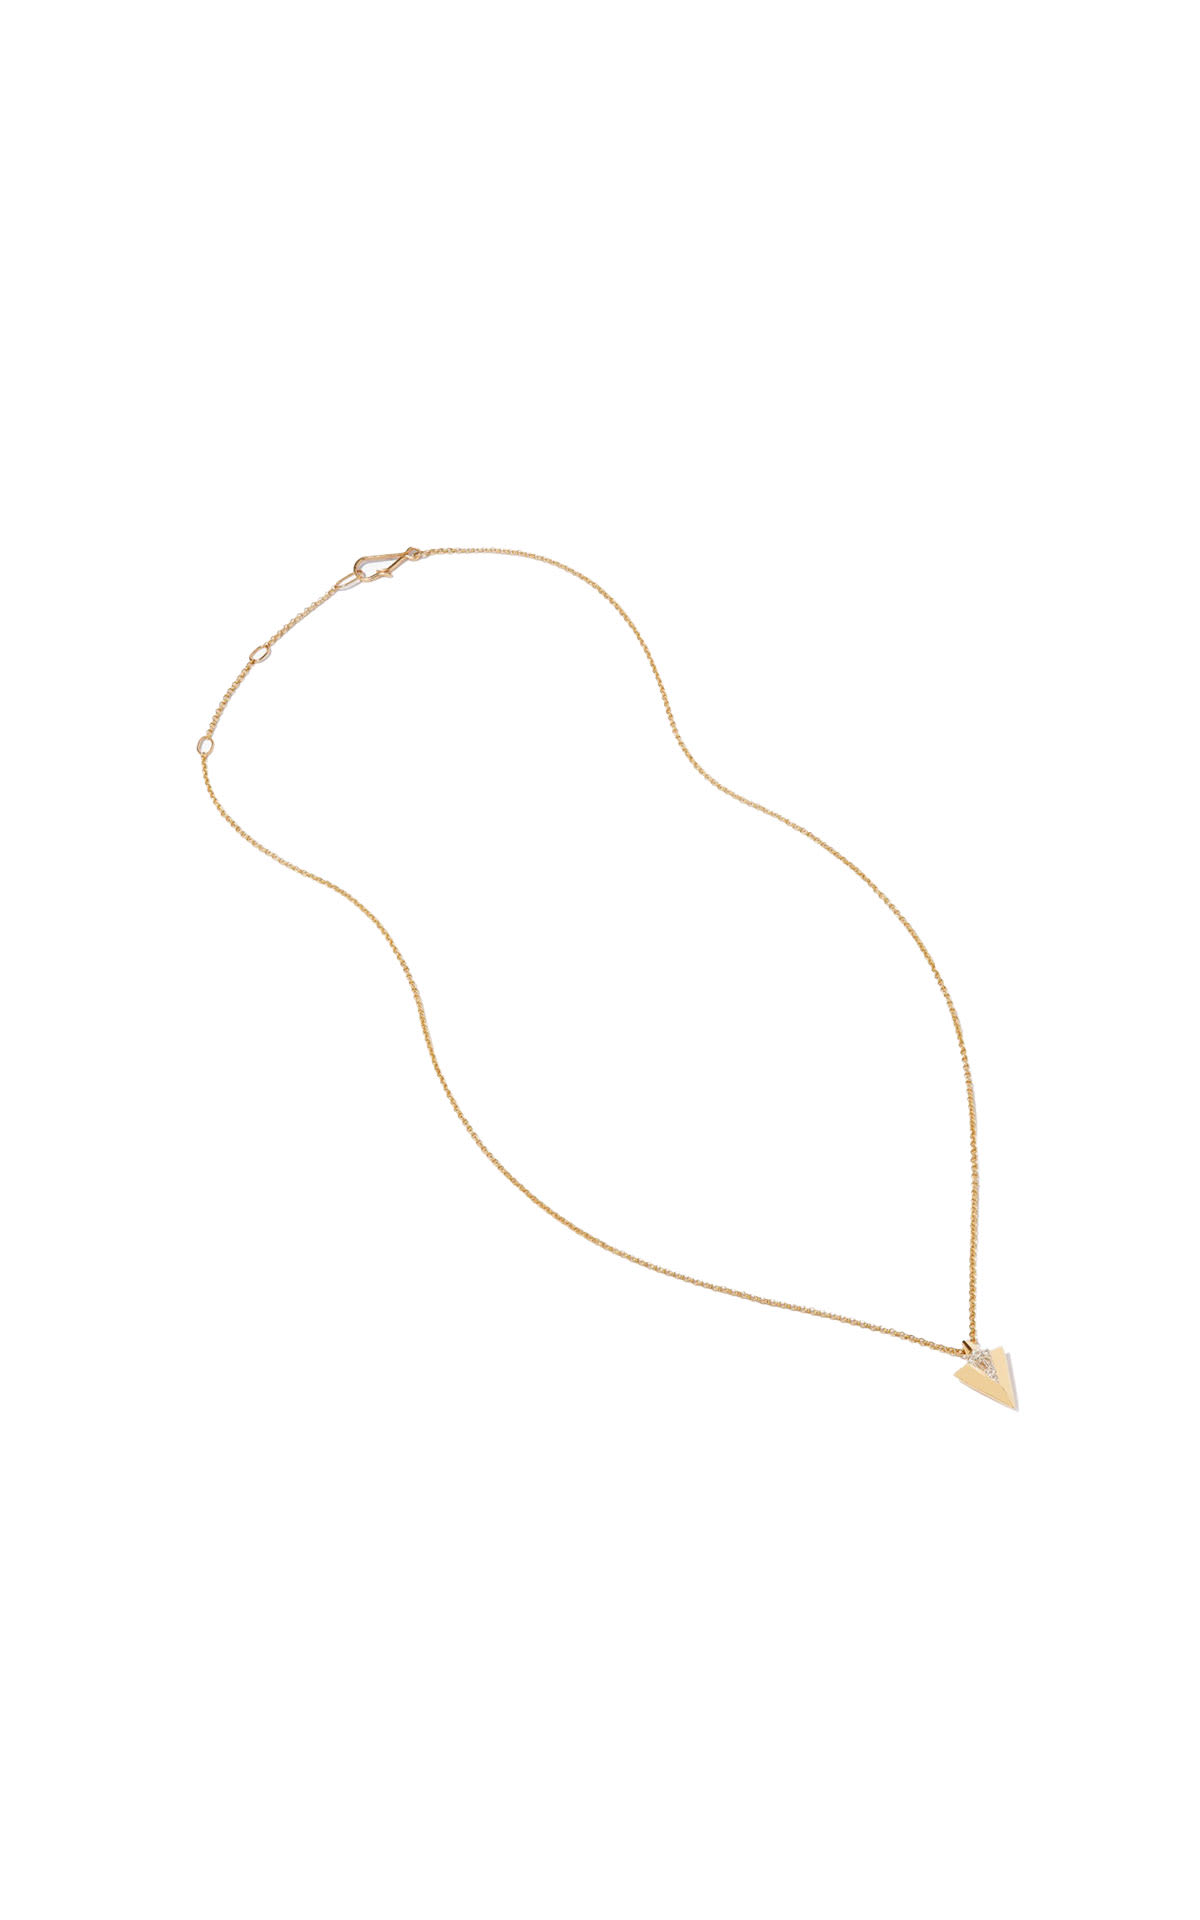 Annoushka Flight 18ct yellow gold arrow diamond necklace from Bicester Village